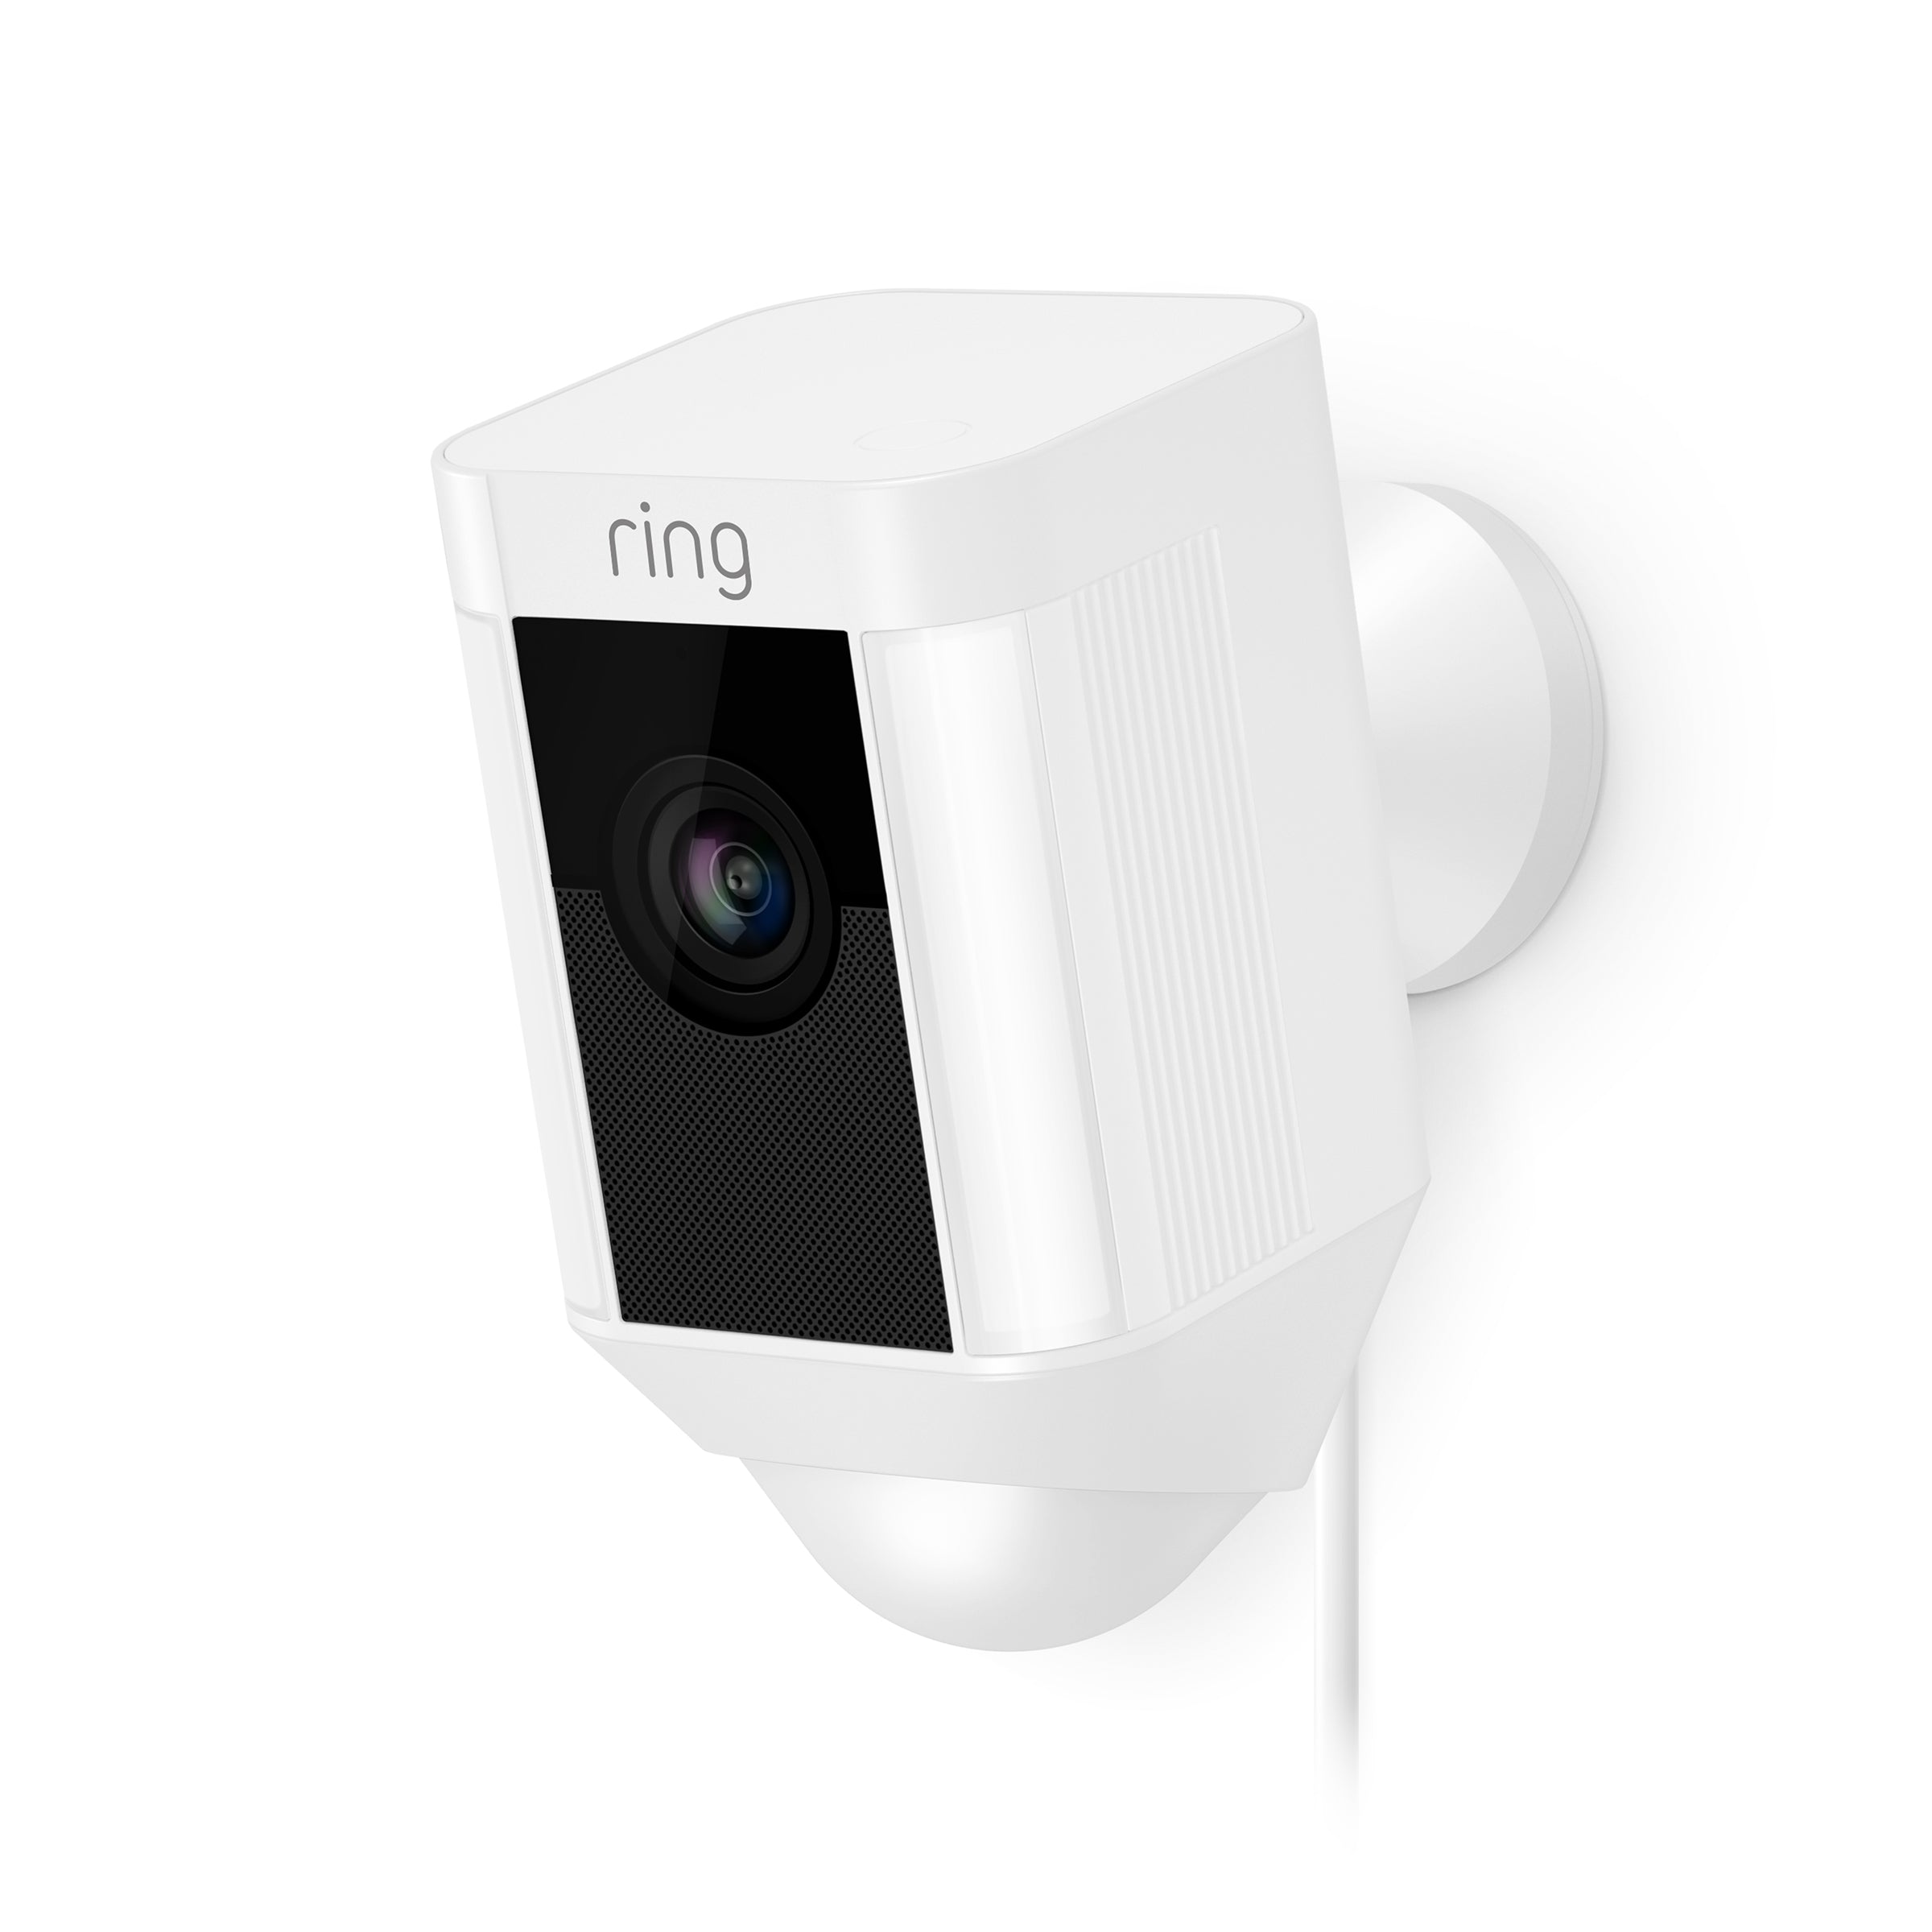 Ring Spotlight Cam Wired: Plugged-in HD security camera with built-in spotlights, two-way talk and a siren alarm, Works with Alexa